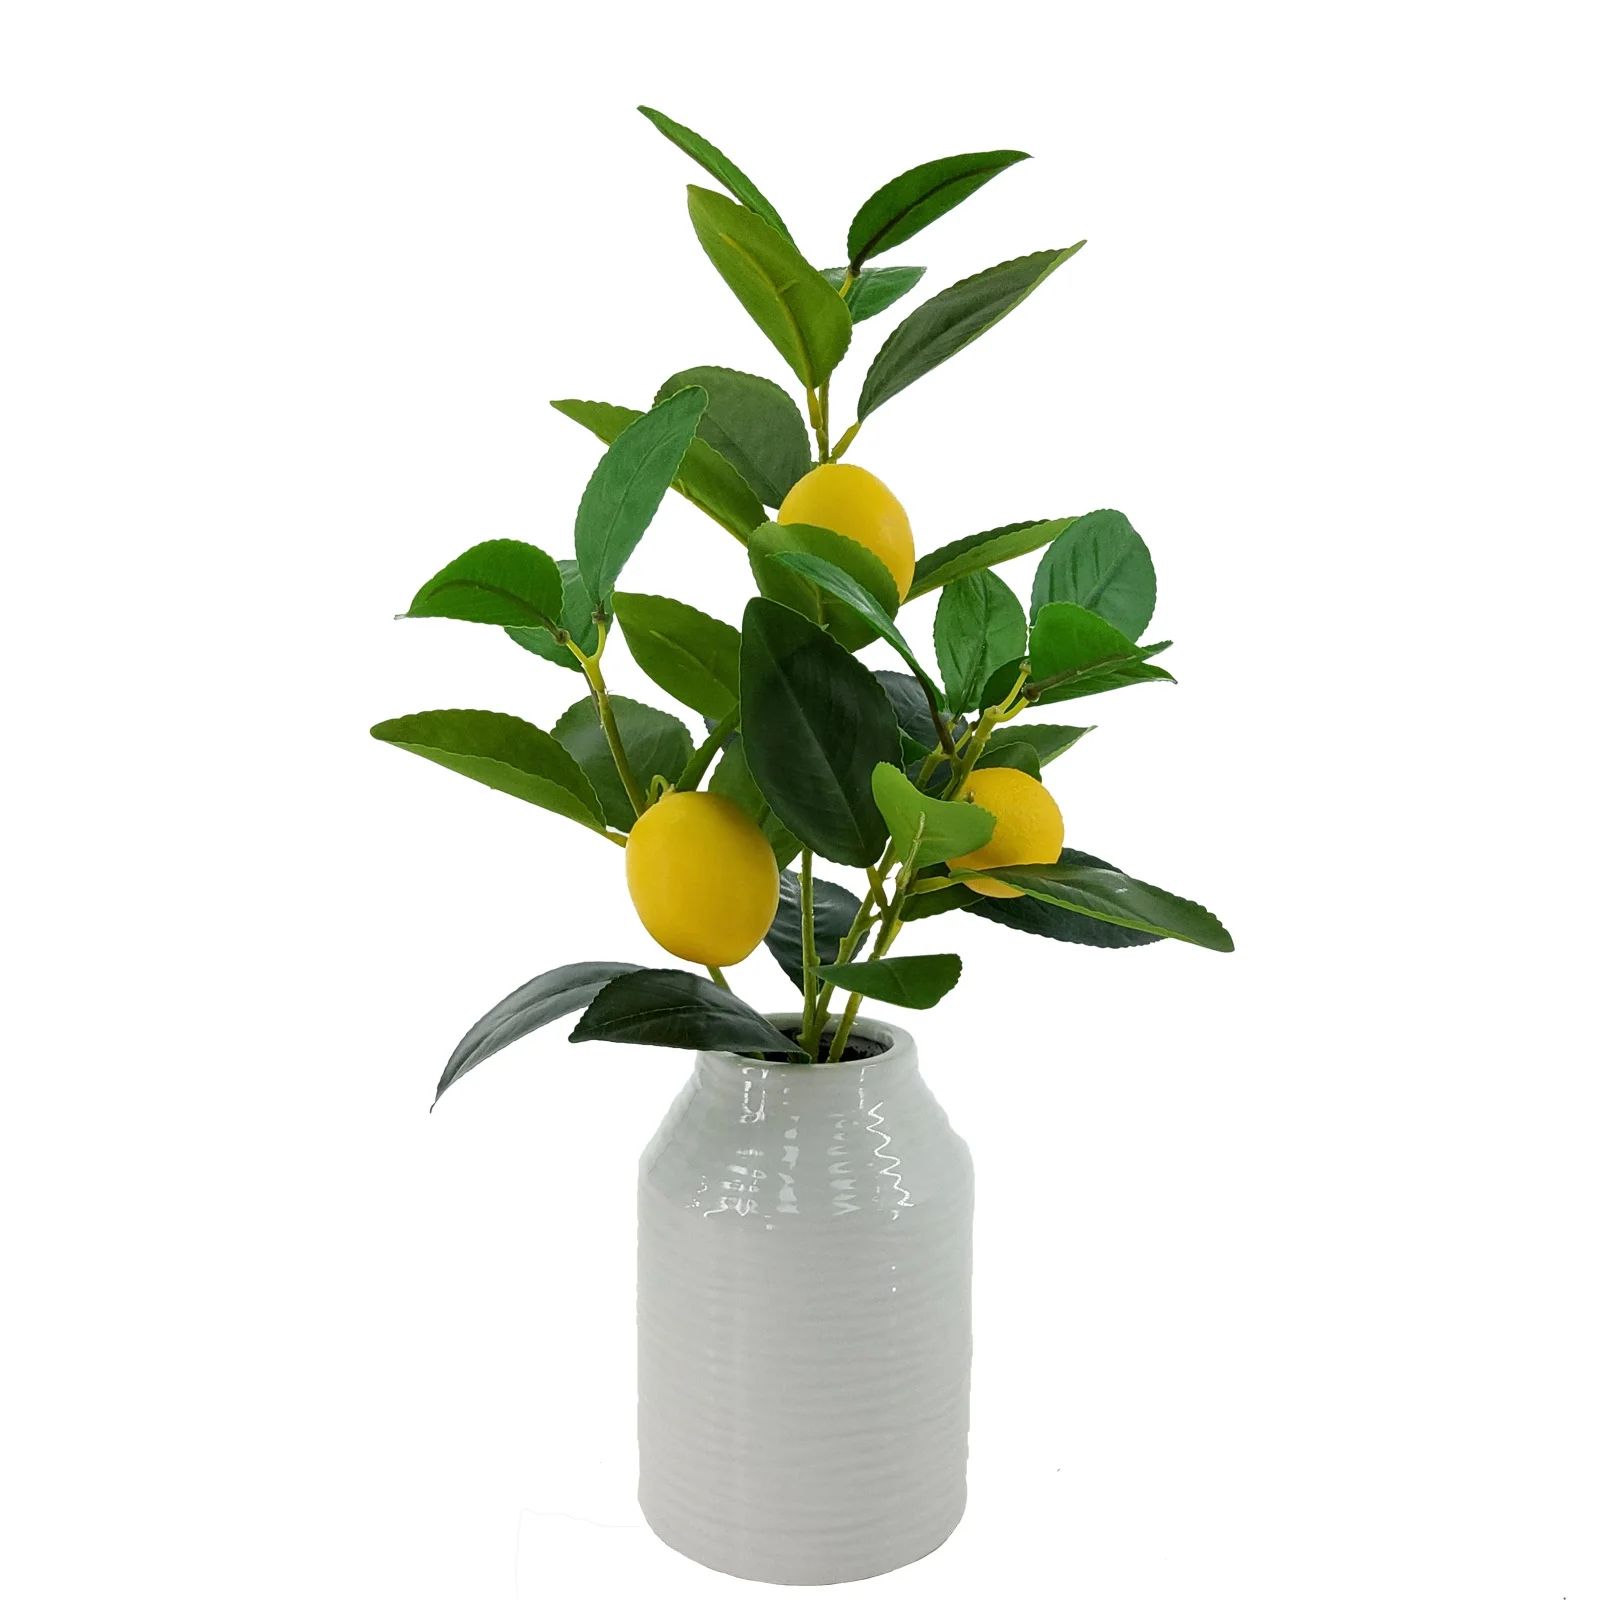 Mainstays 16in Indoor Artificial Lemon Plant in White Color Ceramic Pot, Product Weight 1.3lb | Walmart (US)